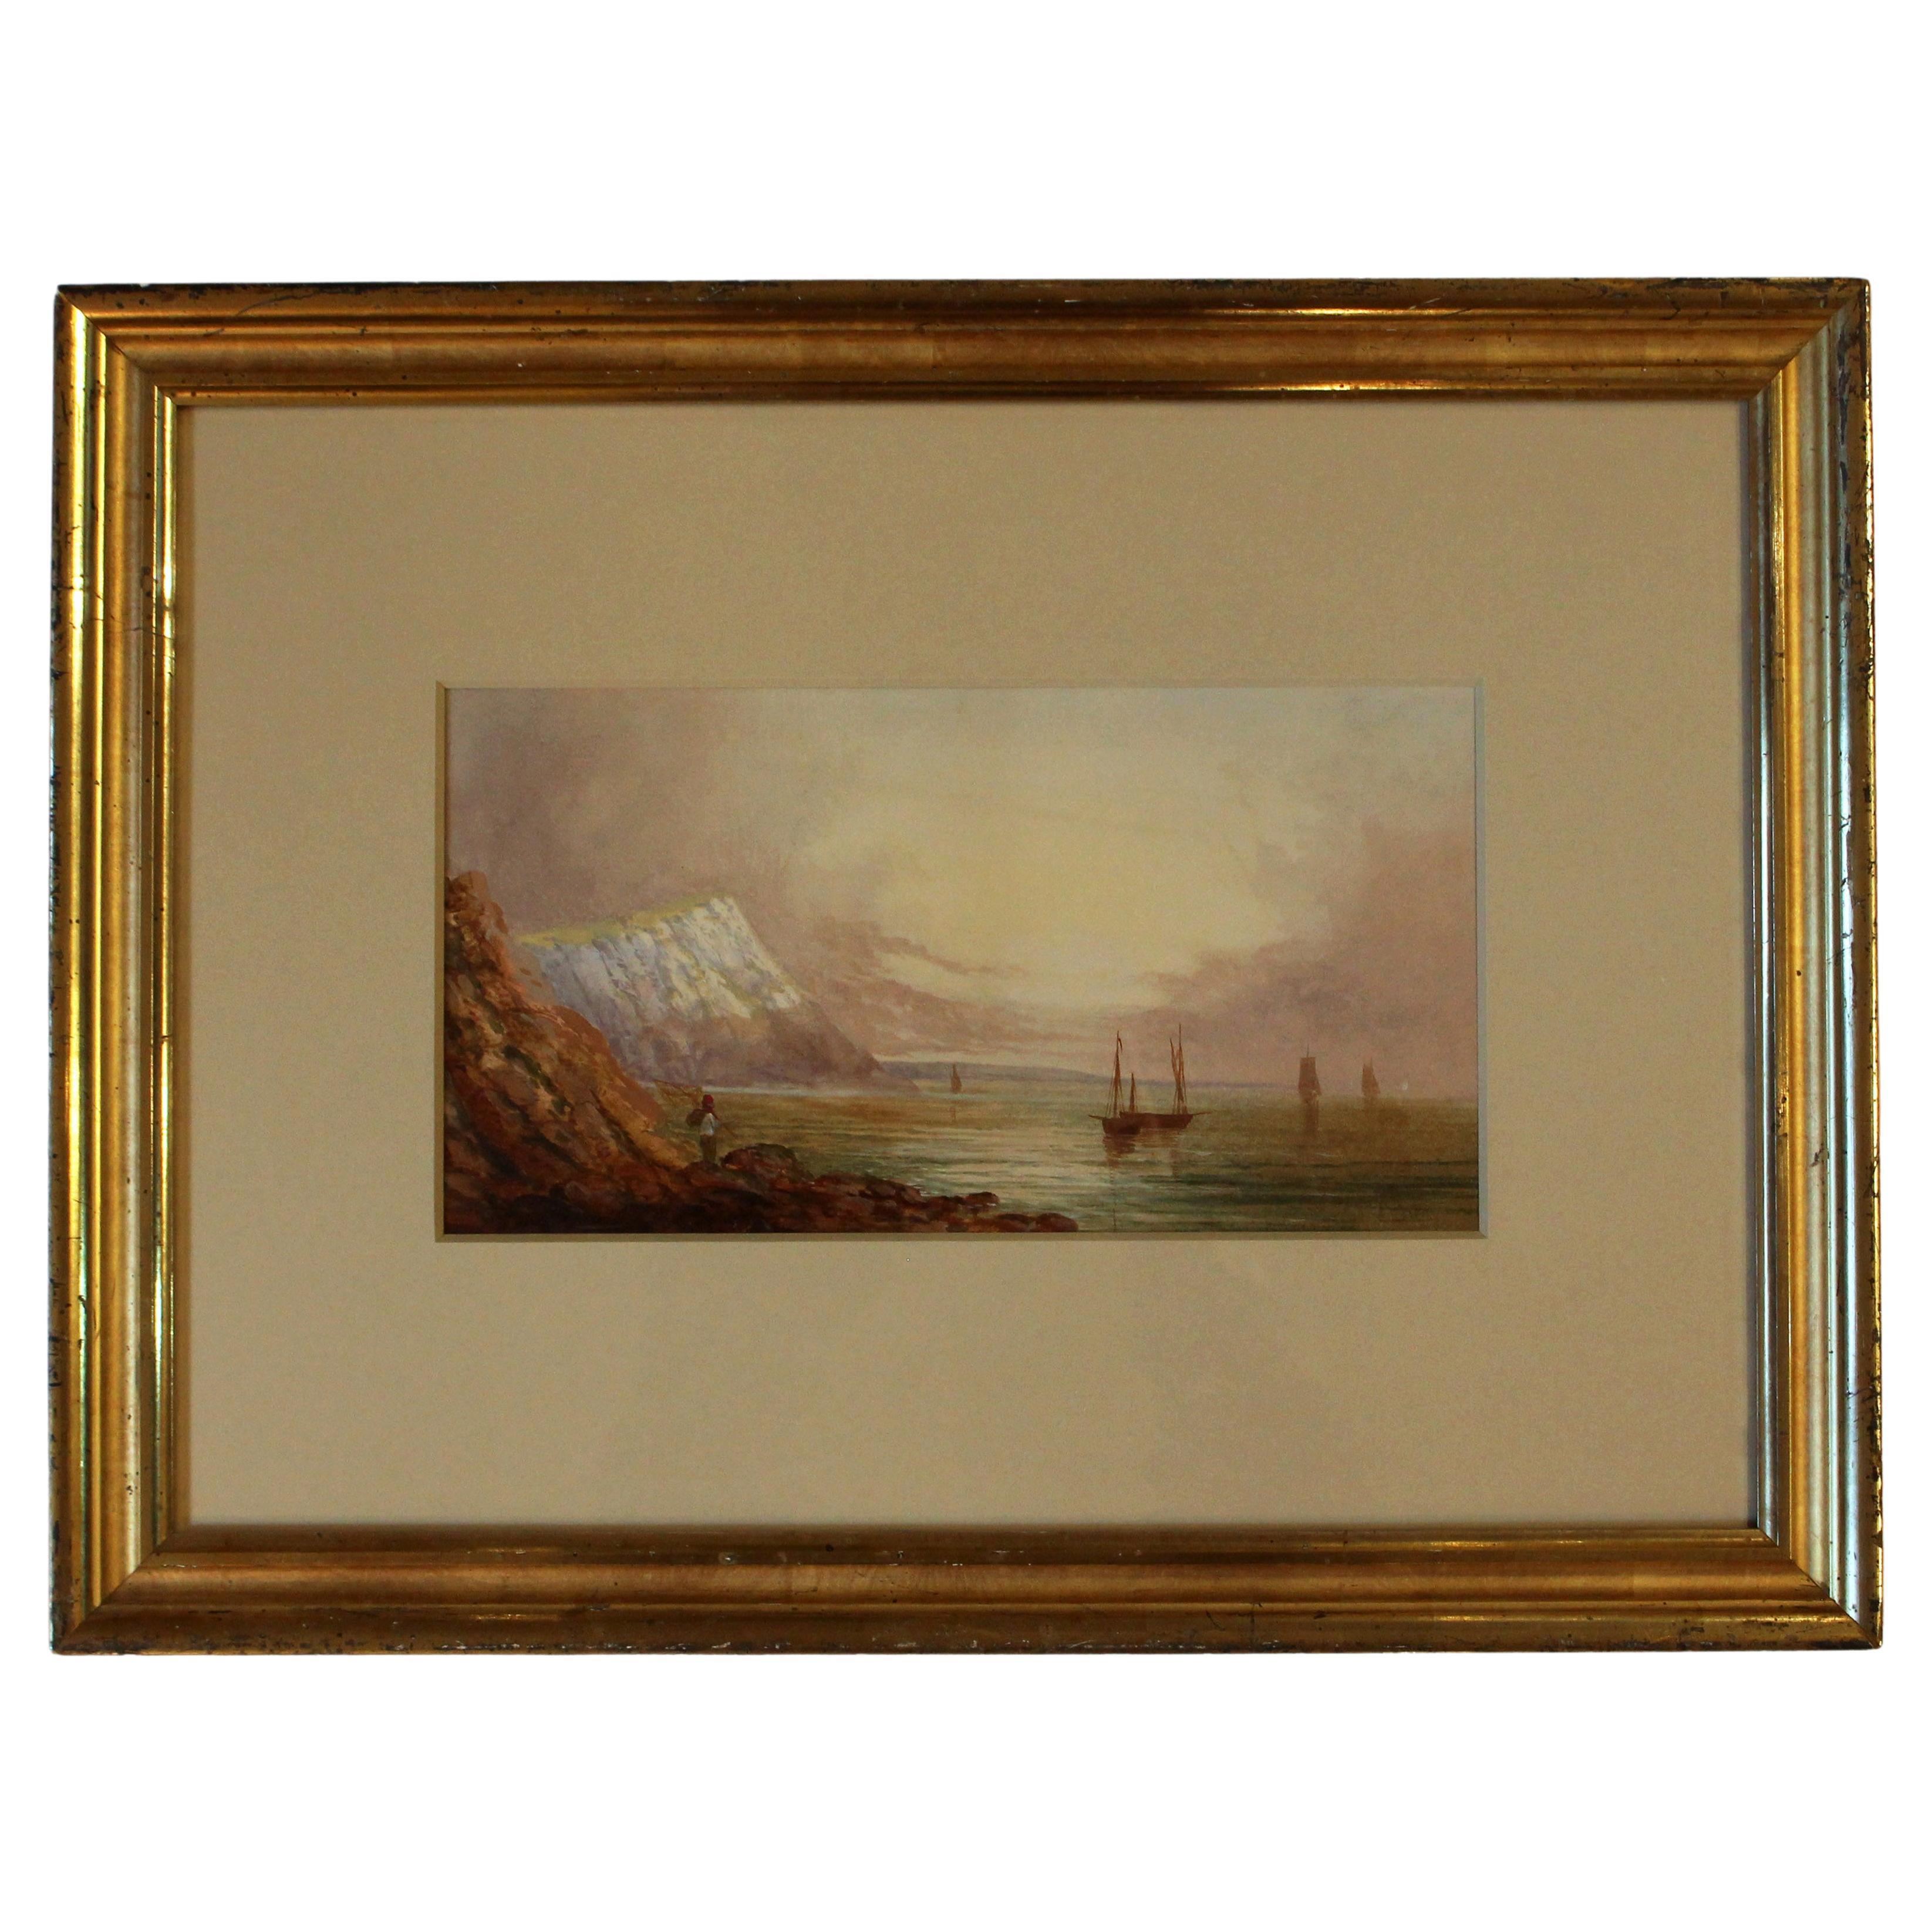 3rd-4th Quarter 19th Century English Watercolor, "Fishman on the Dover Coast at  For Sale